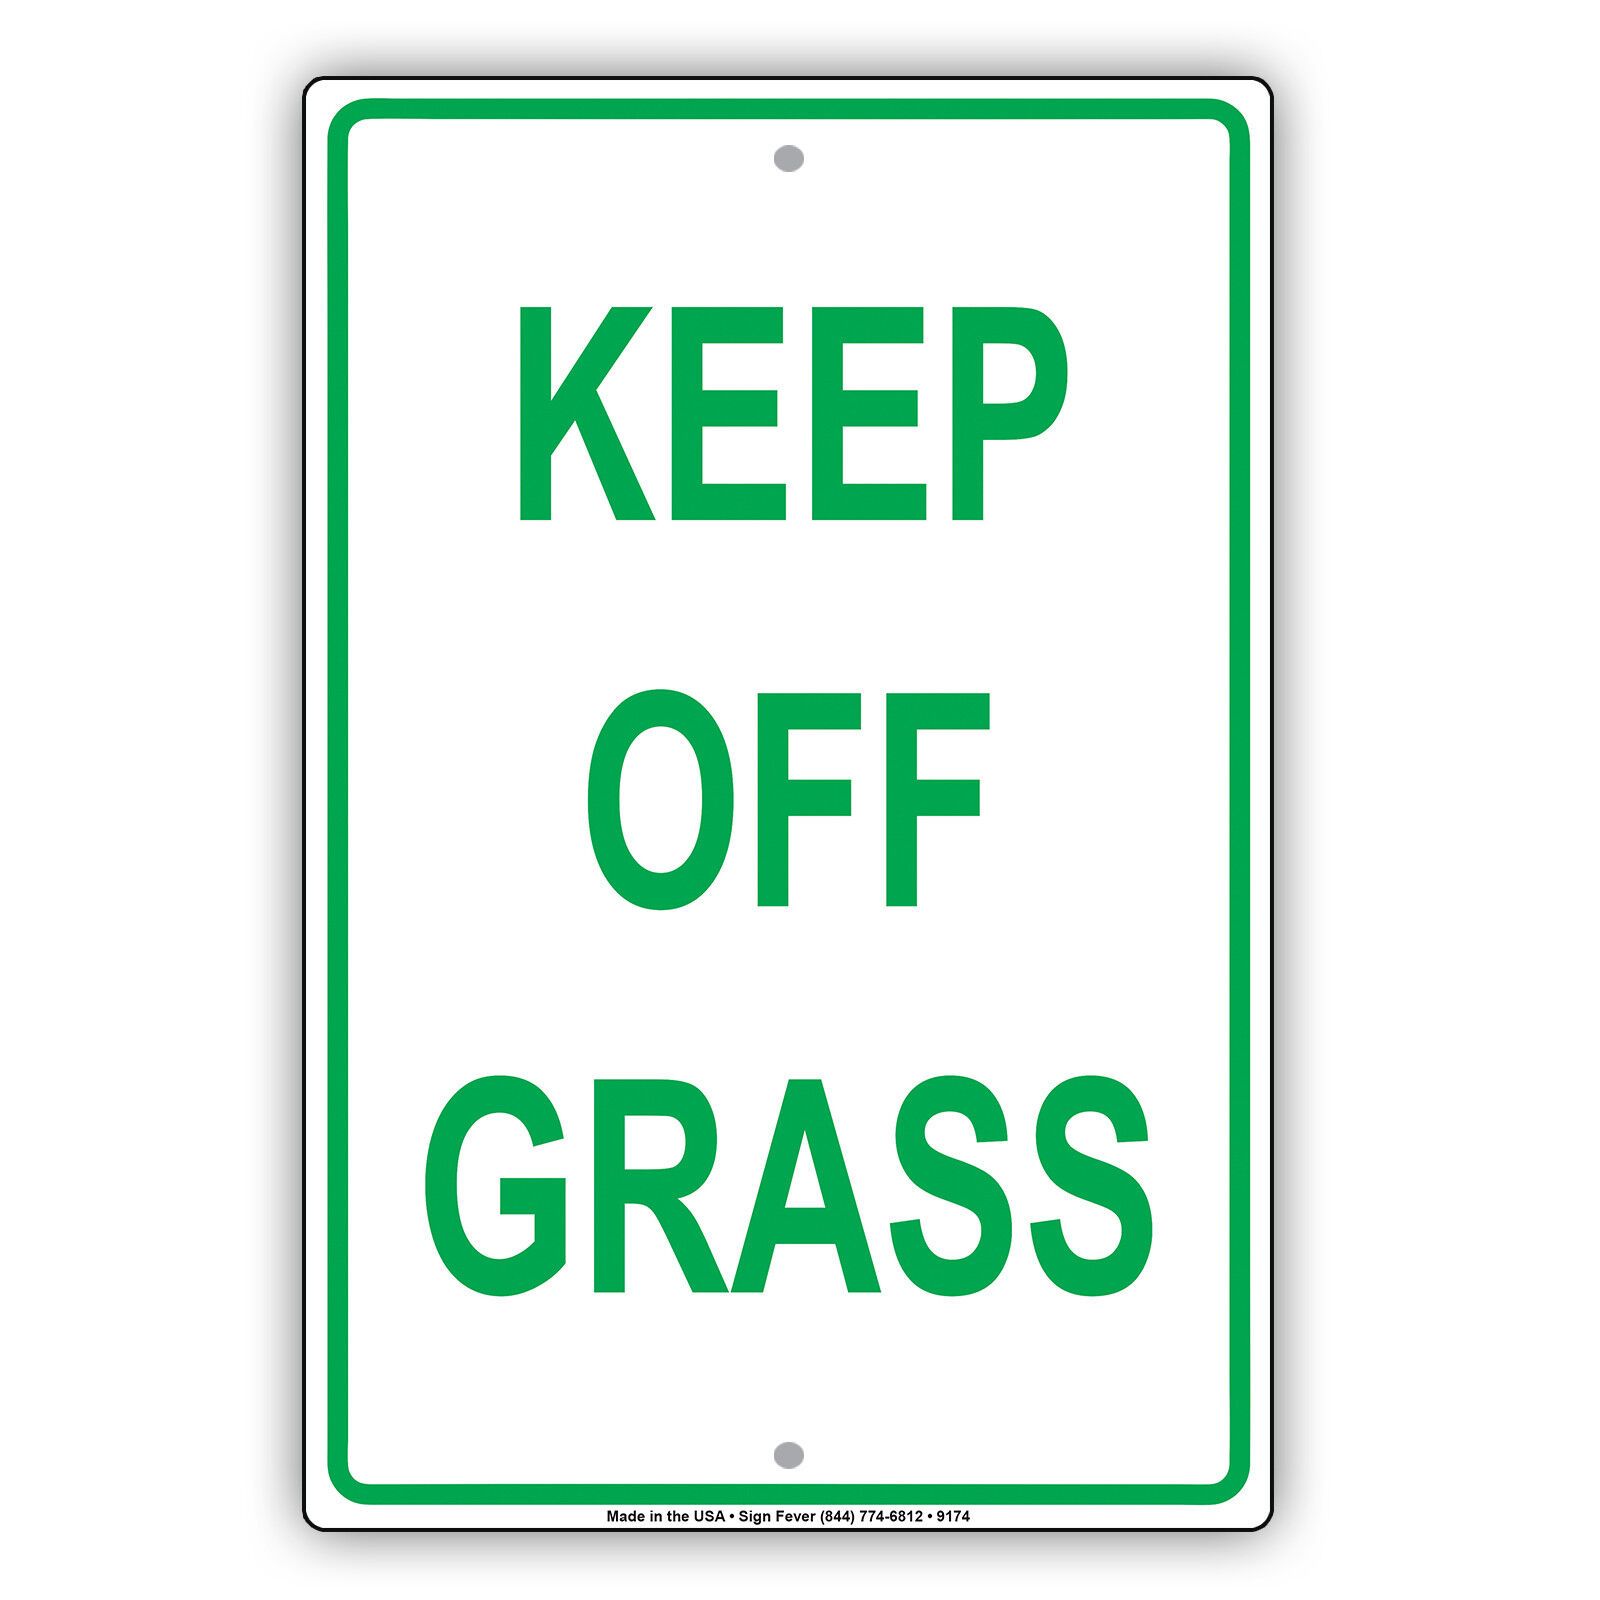 Keep Off Grass Wall Art Decor Novelty Notice Caution Aluminum Metal Sign |  Ebay With Regard To Most Up To Date Metal Sign Stake Wall Art (View 12 of 20)